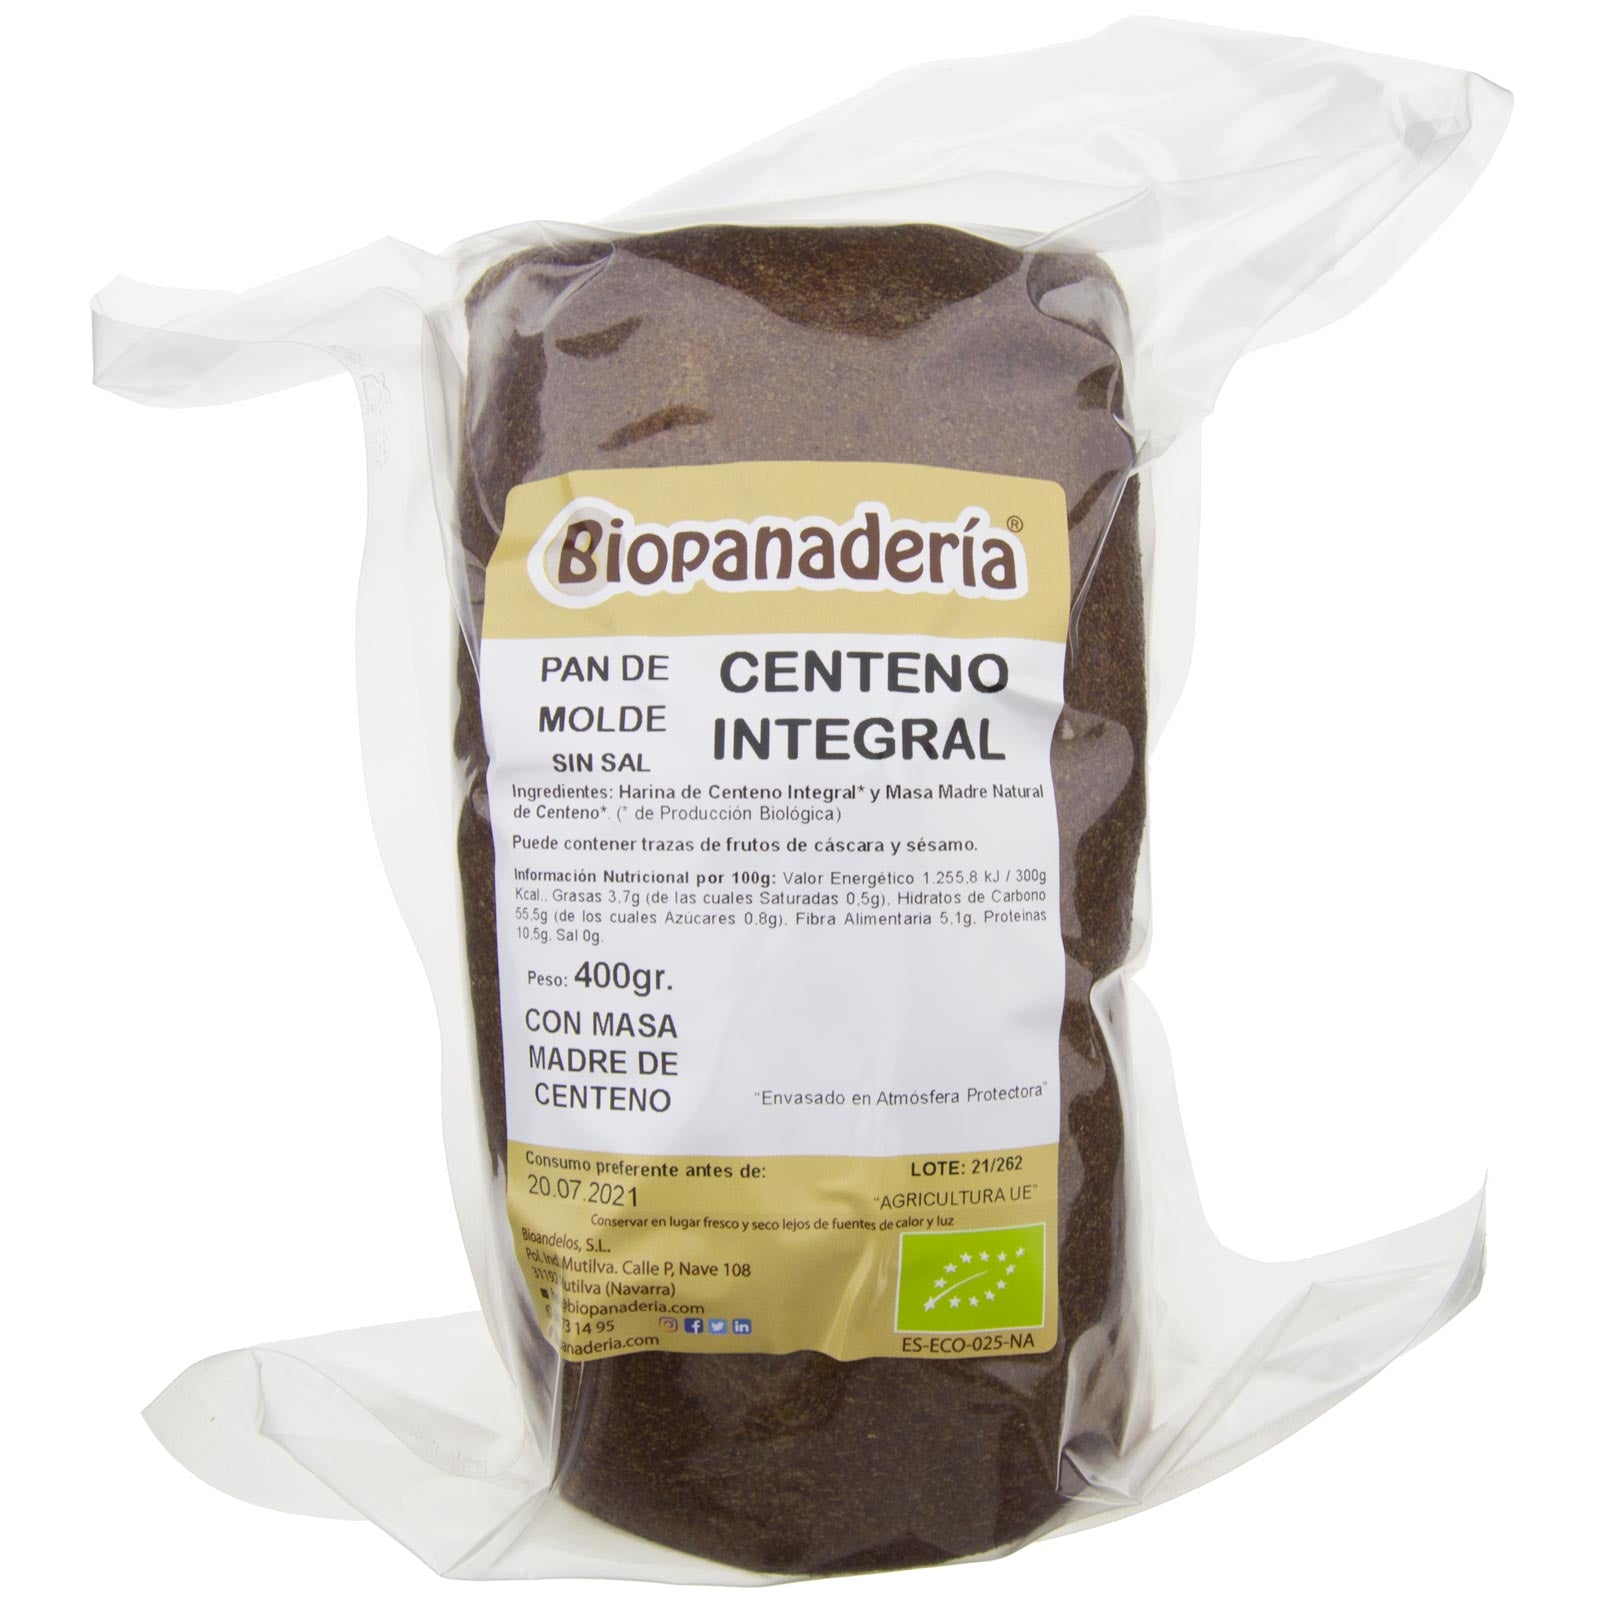 Integral rye mold bread without ecological salt (8 units x 400g) (uncut)